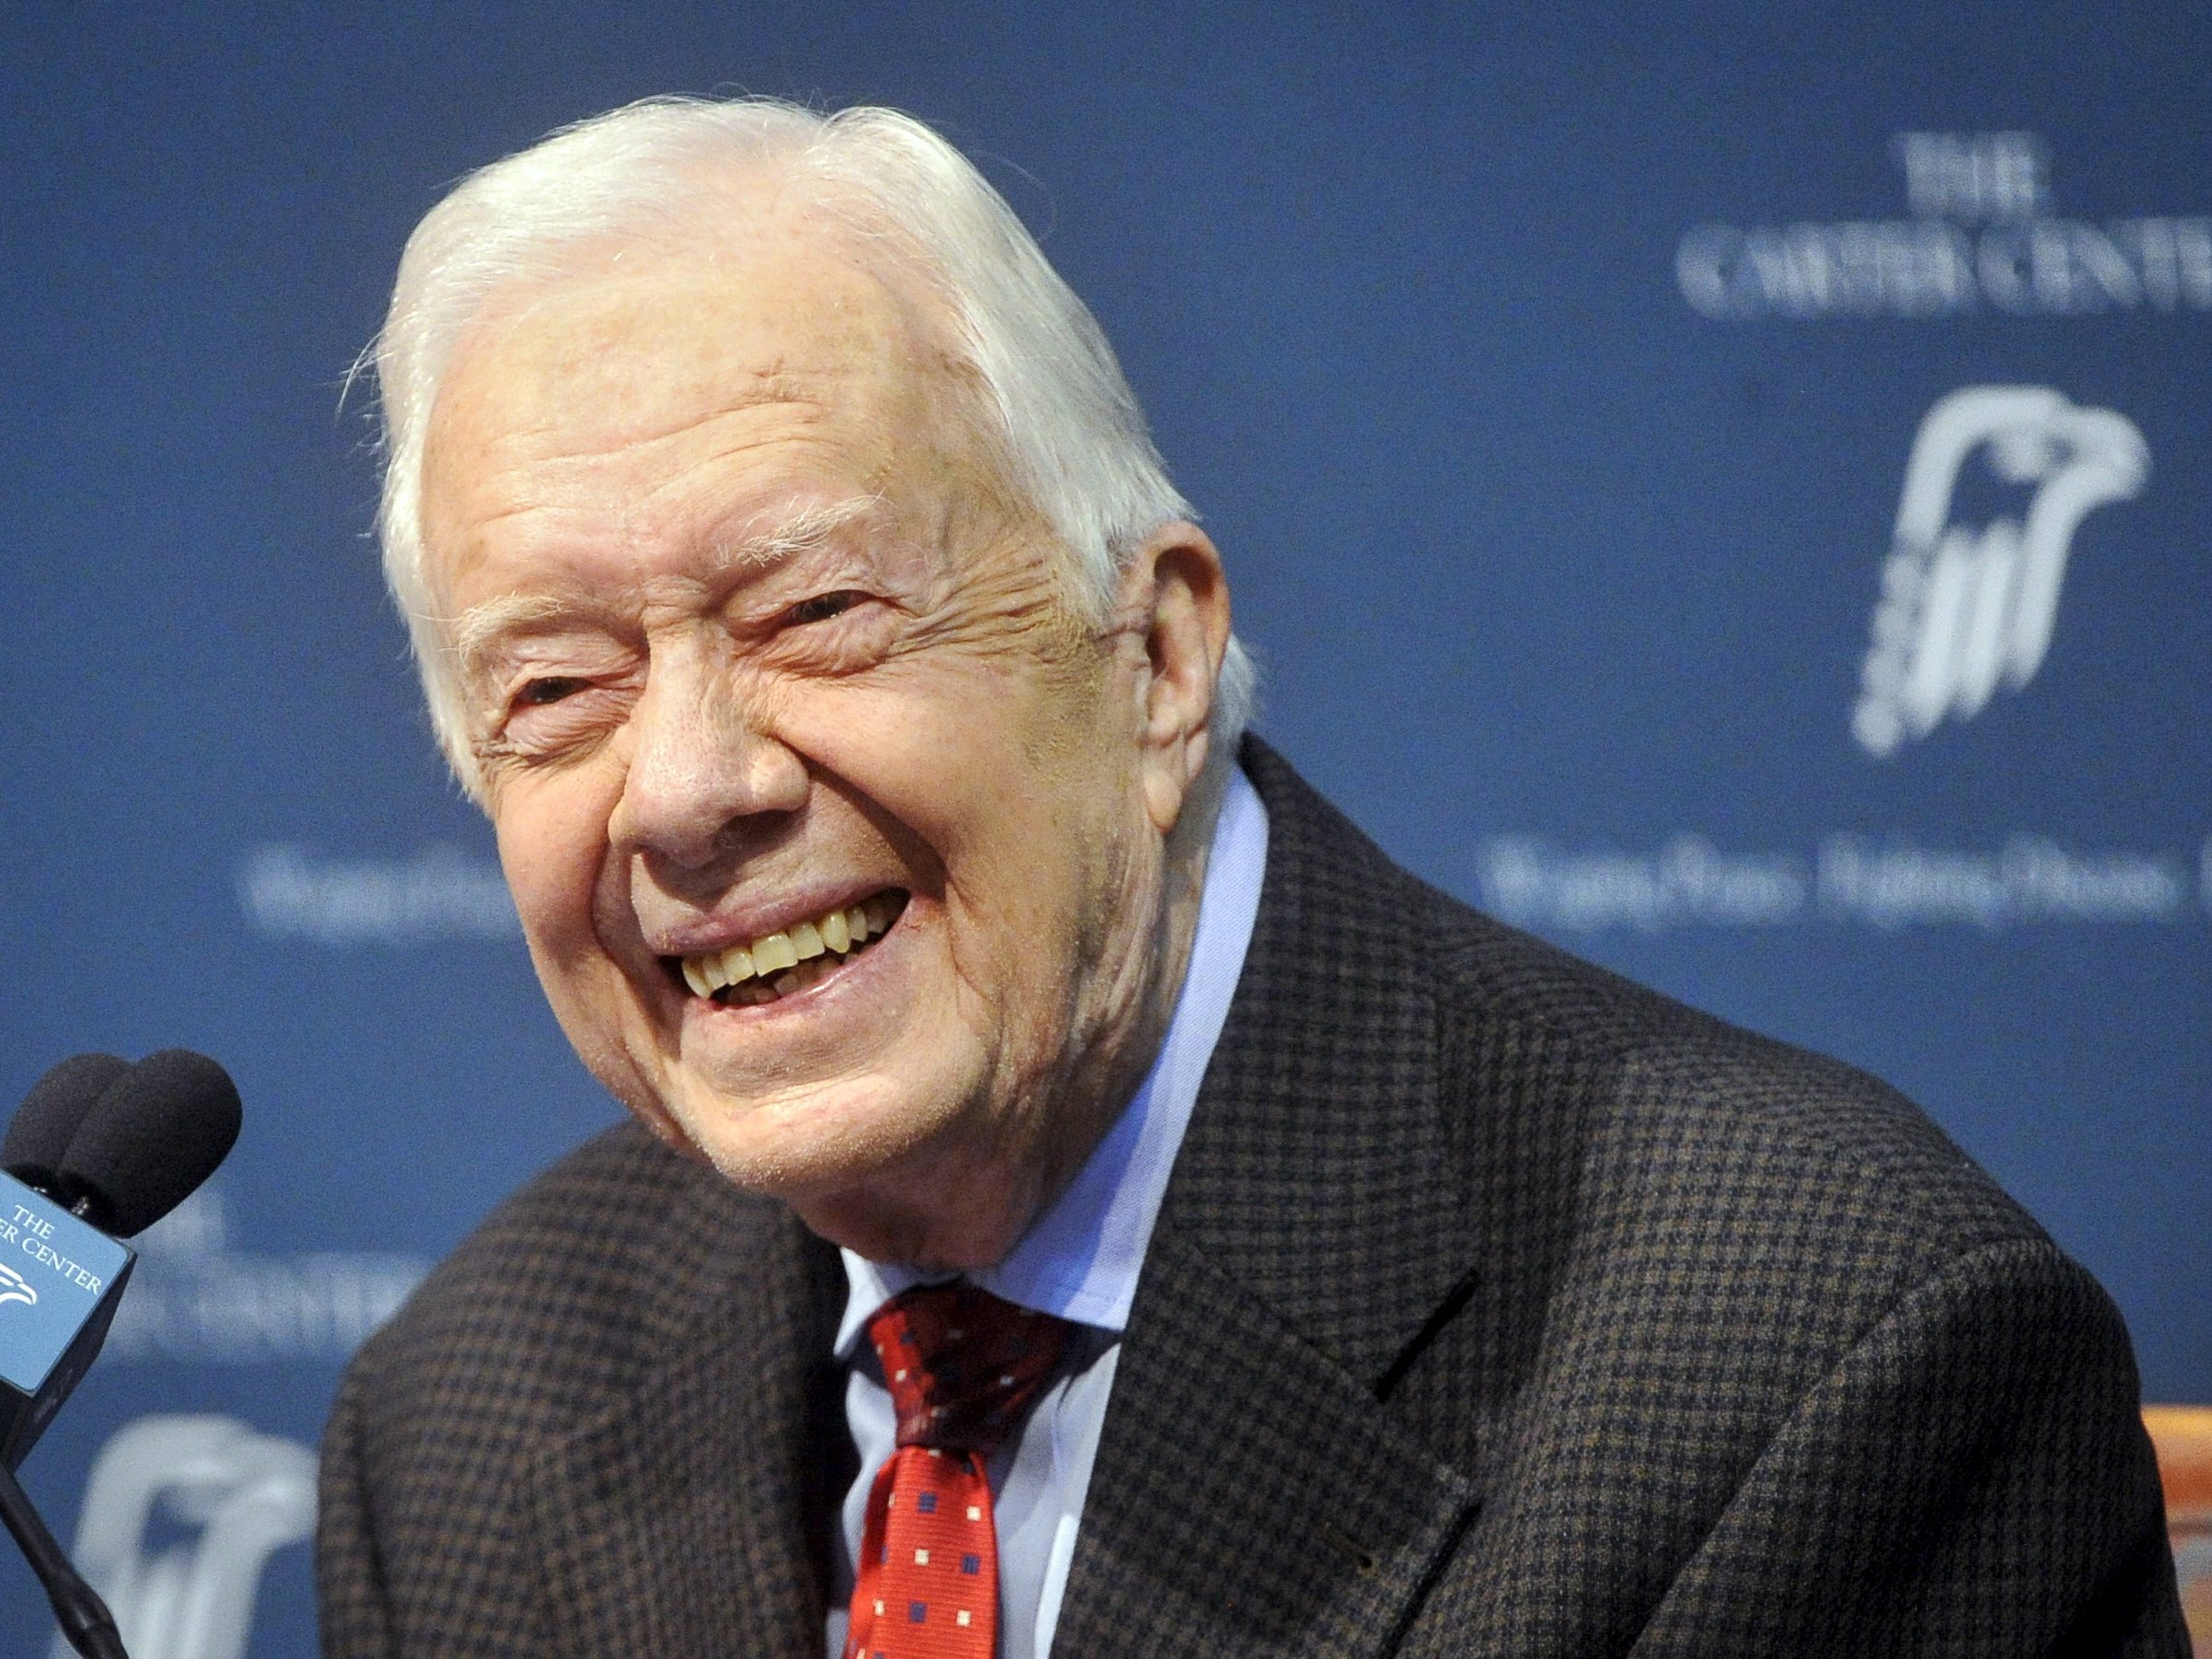 Former U.S. President Jimmy Carter takes questions from the media during a news conference about his recent cancer diagnosis and treatment plans, at the Carter Center in Atlanta, Georgia. Carter said on Thursday he will start radiation treatment for cance